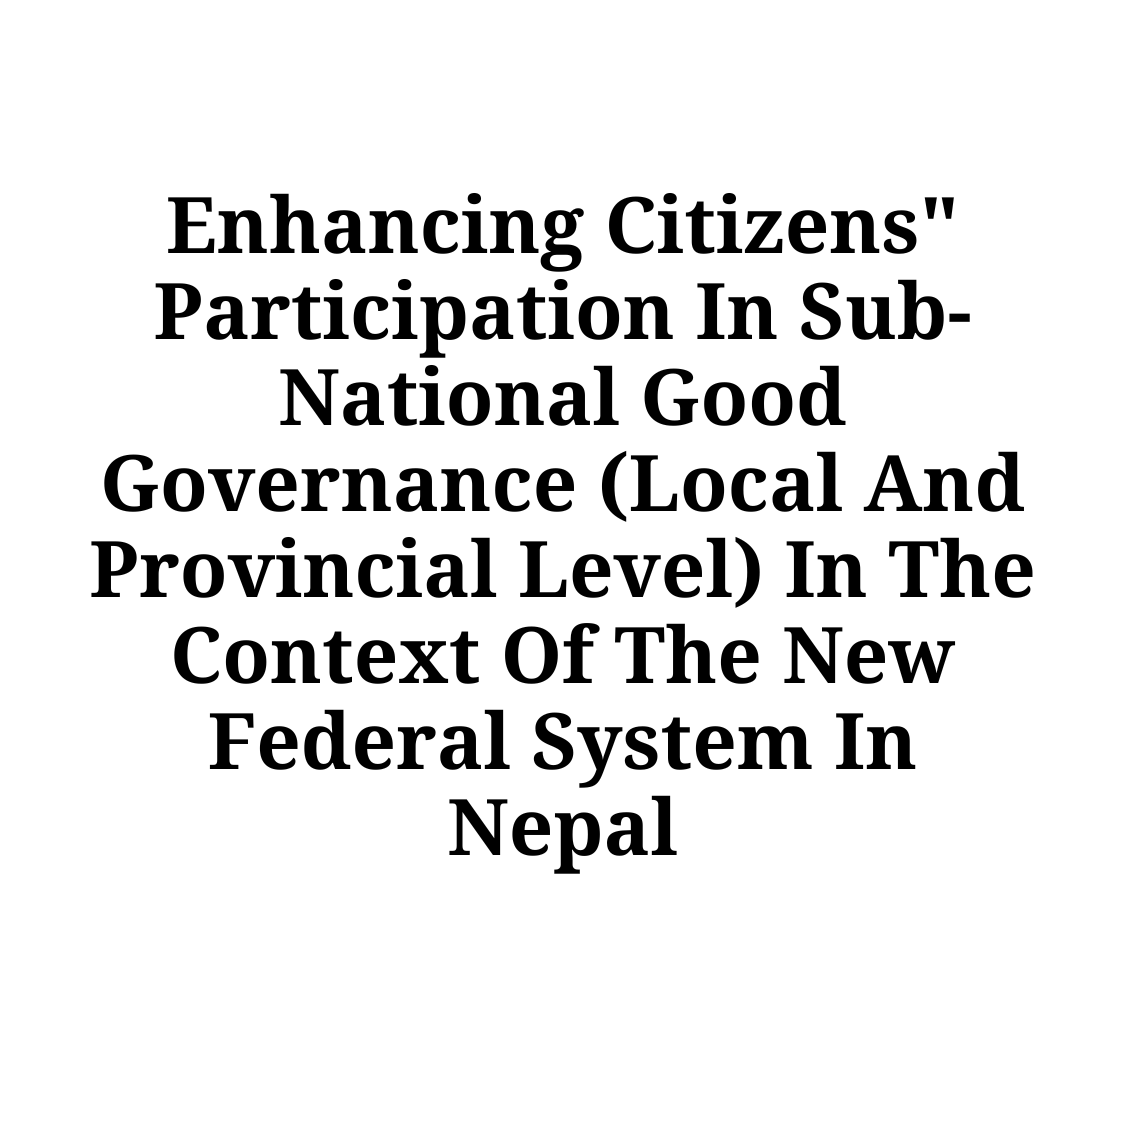 Enhancing Citizens" Participation in Sub-National Good Governance (Local and Provincial Level) in the Context of the New Federal System in Nepal